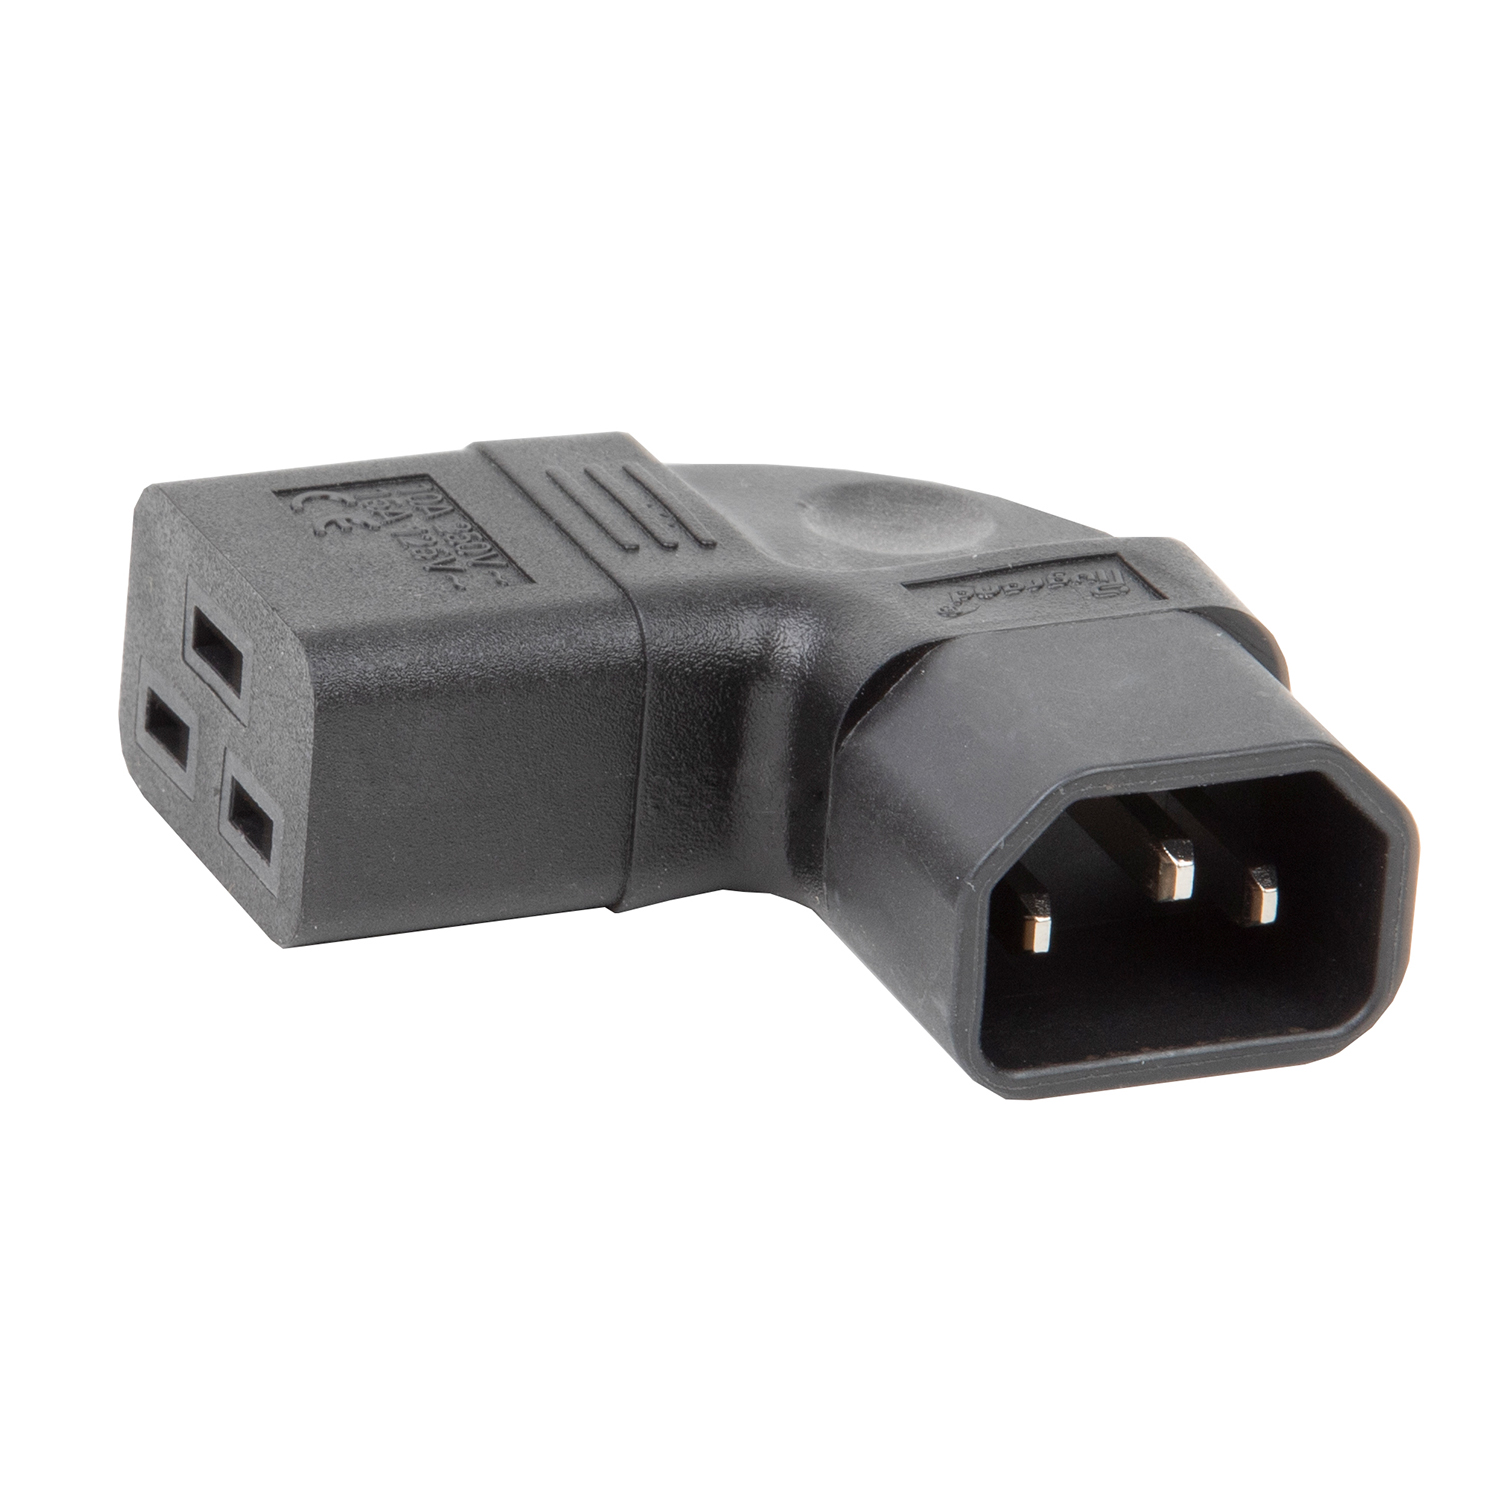 PA-0351 IEC C14 to C19 Left Angled AC Power Adapter,